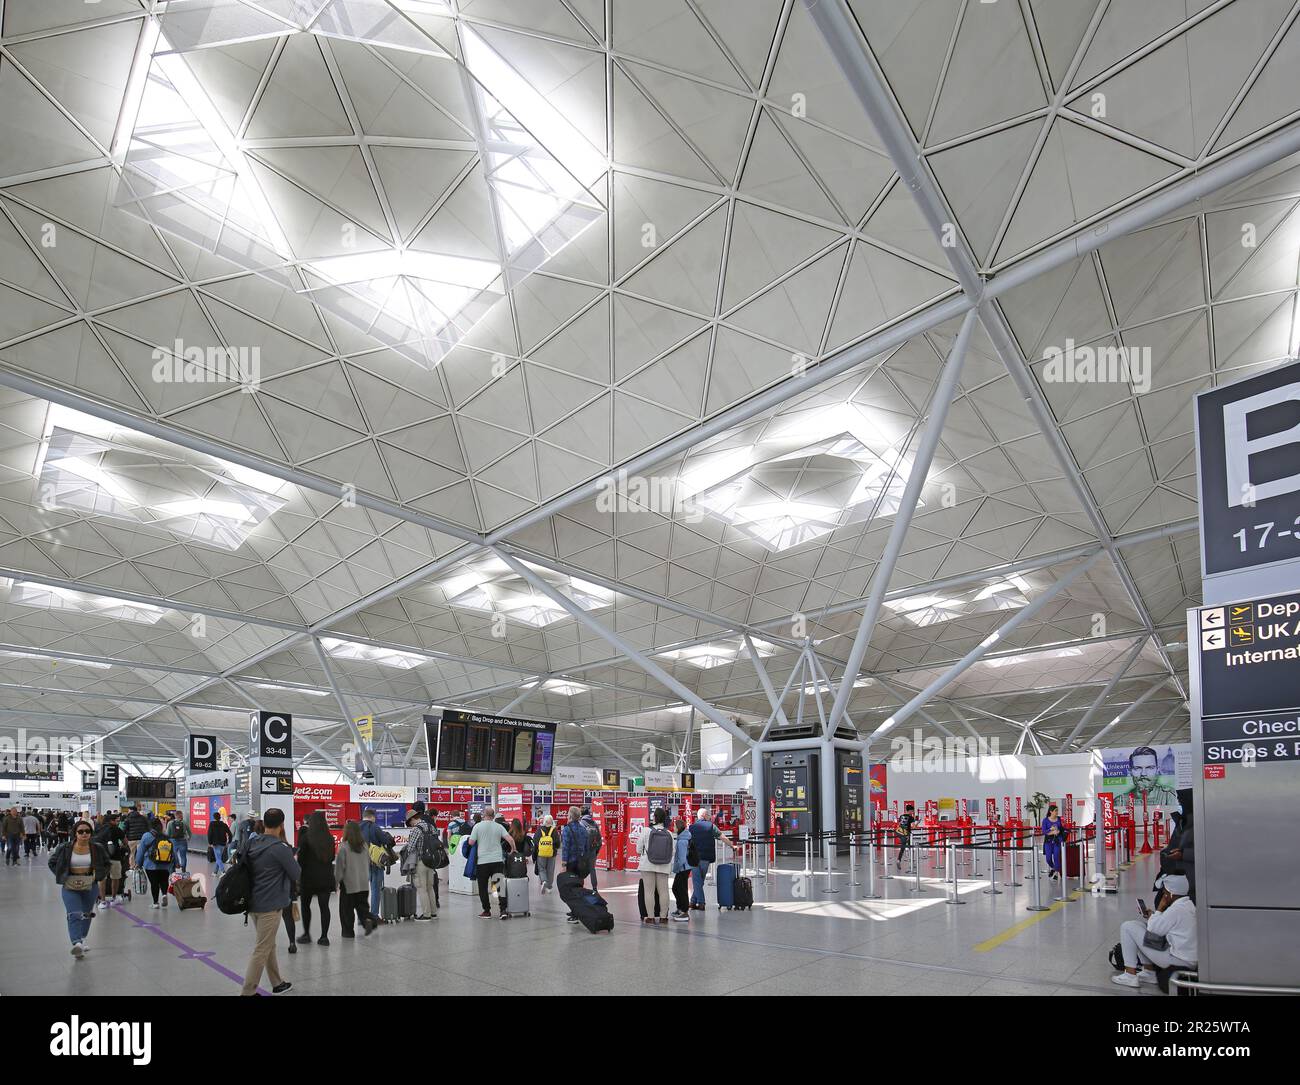 Interior view of Stansted Airport main terminal building showing distinctive roof structure. Designed by Norman Foster. Stock Photo